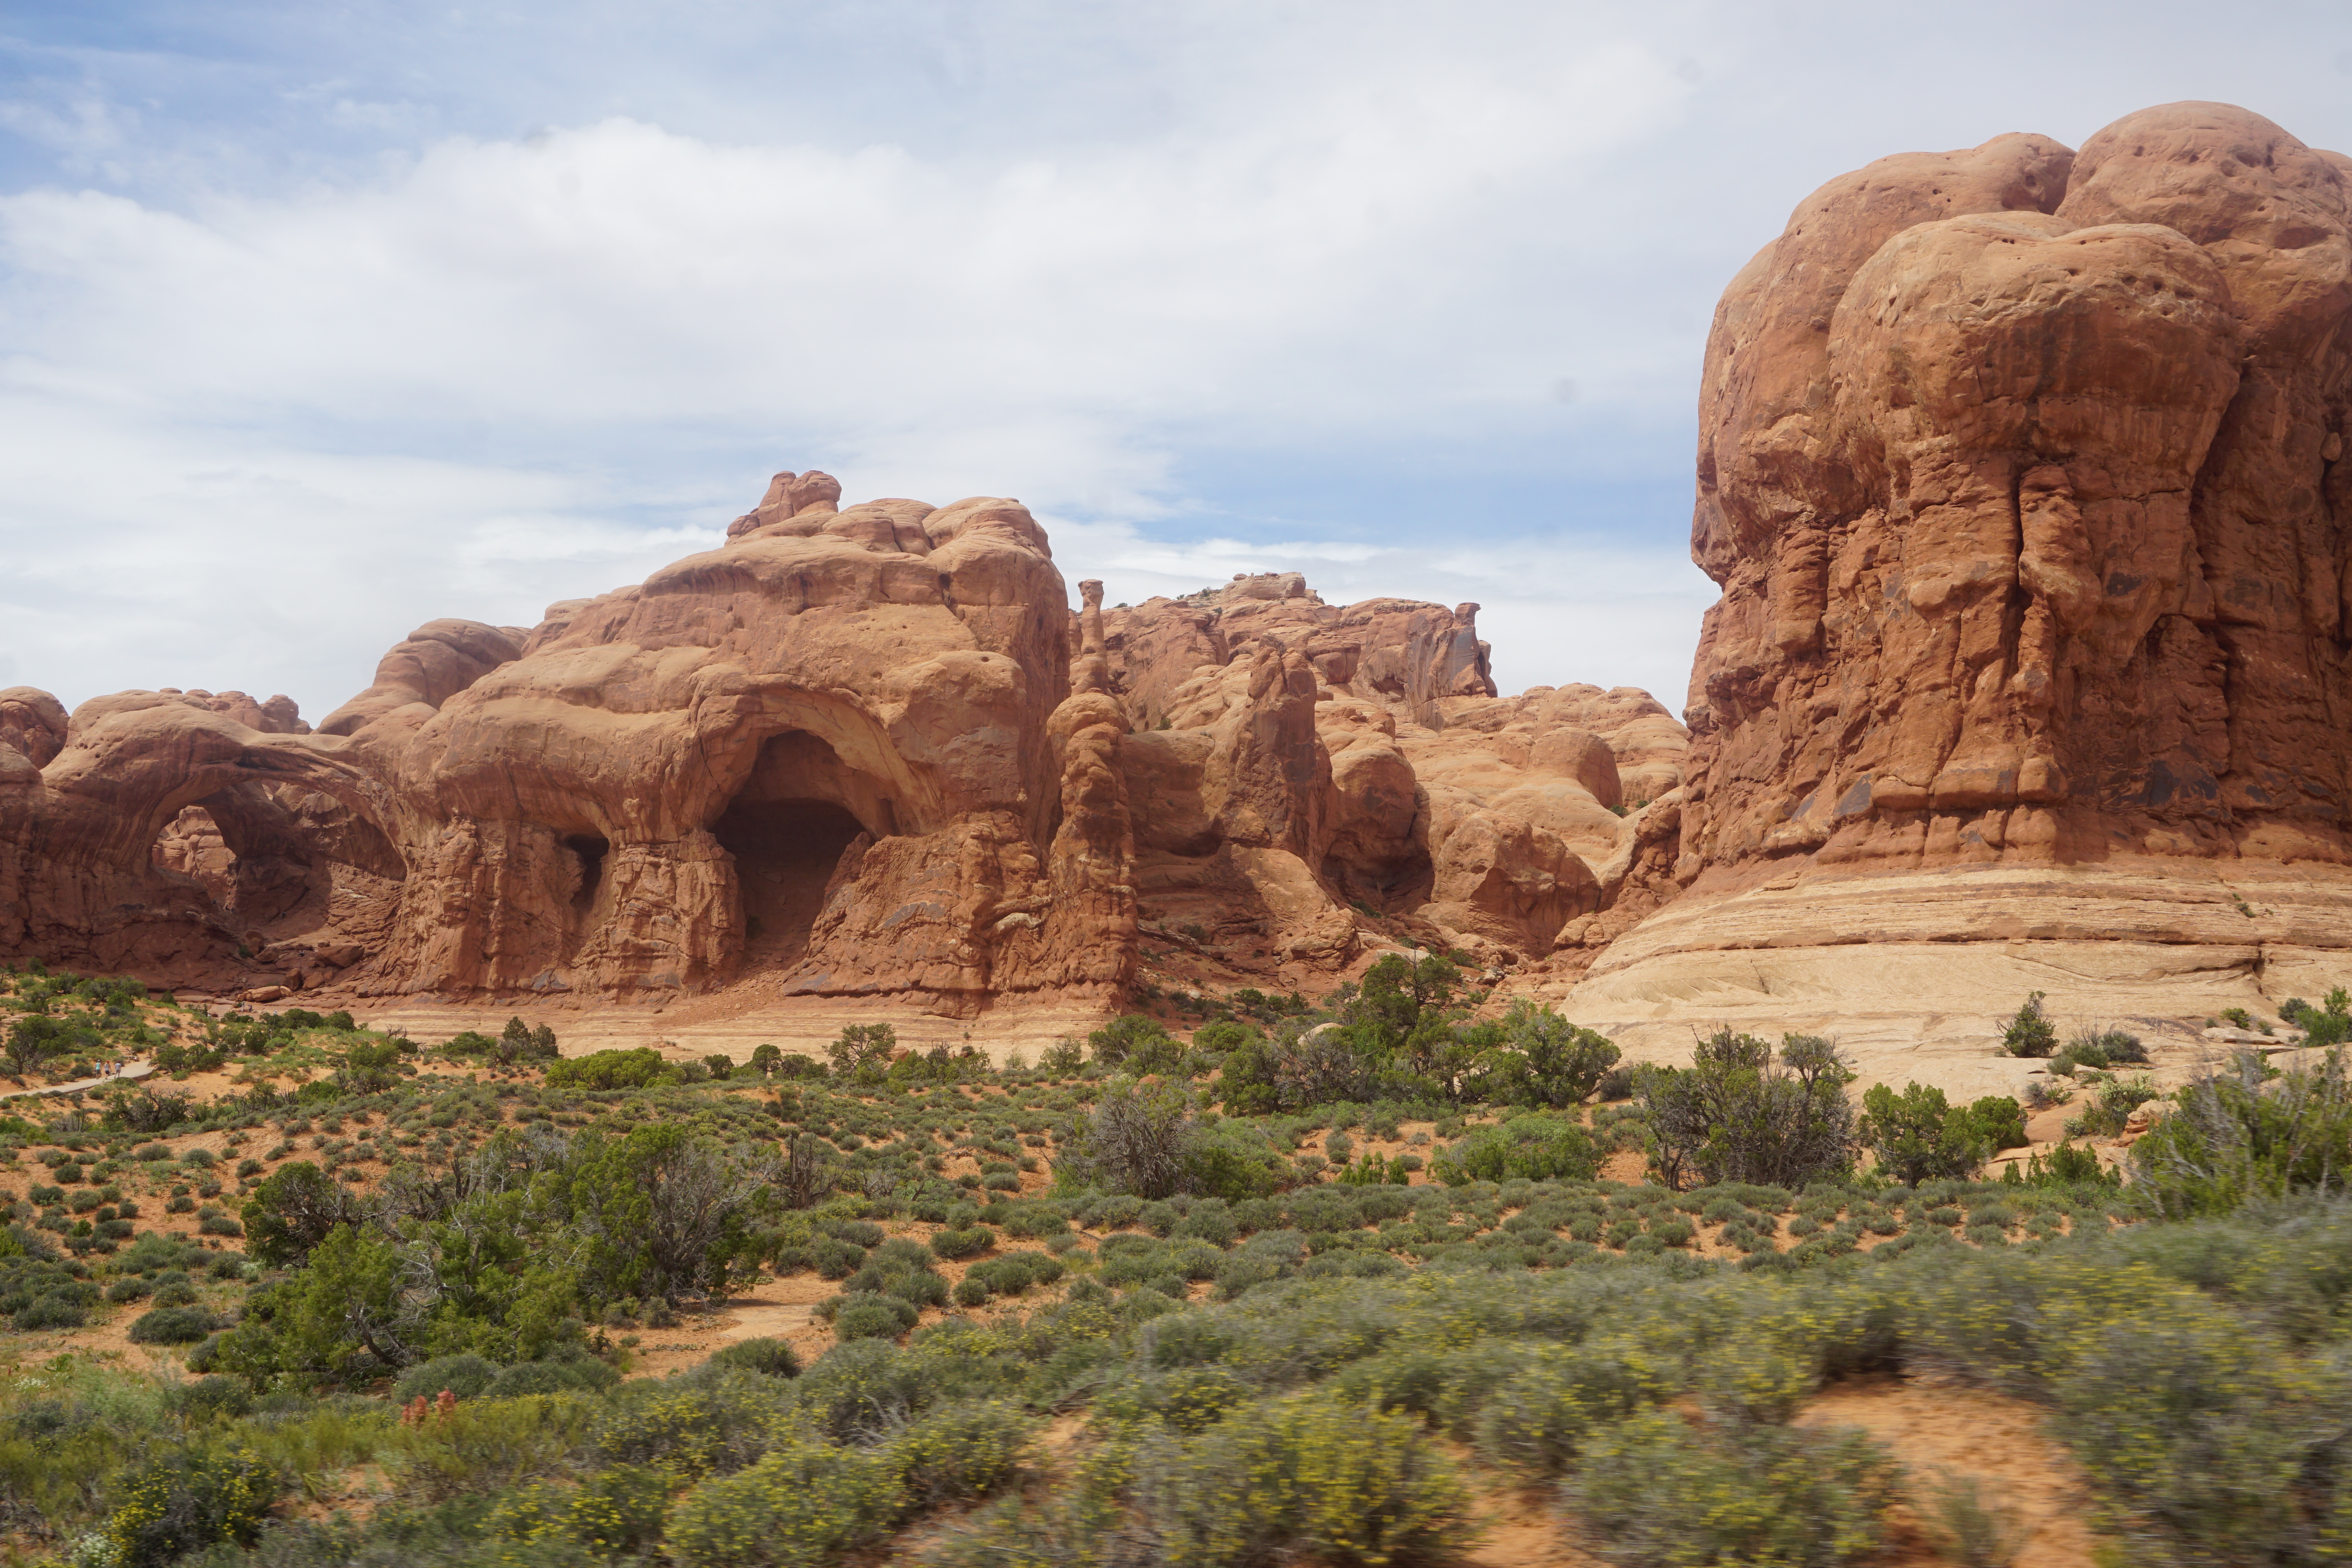 Vegan Travel - Trekking Across the Magnificent Canyonlands and Arches National Parks of Utah